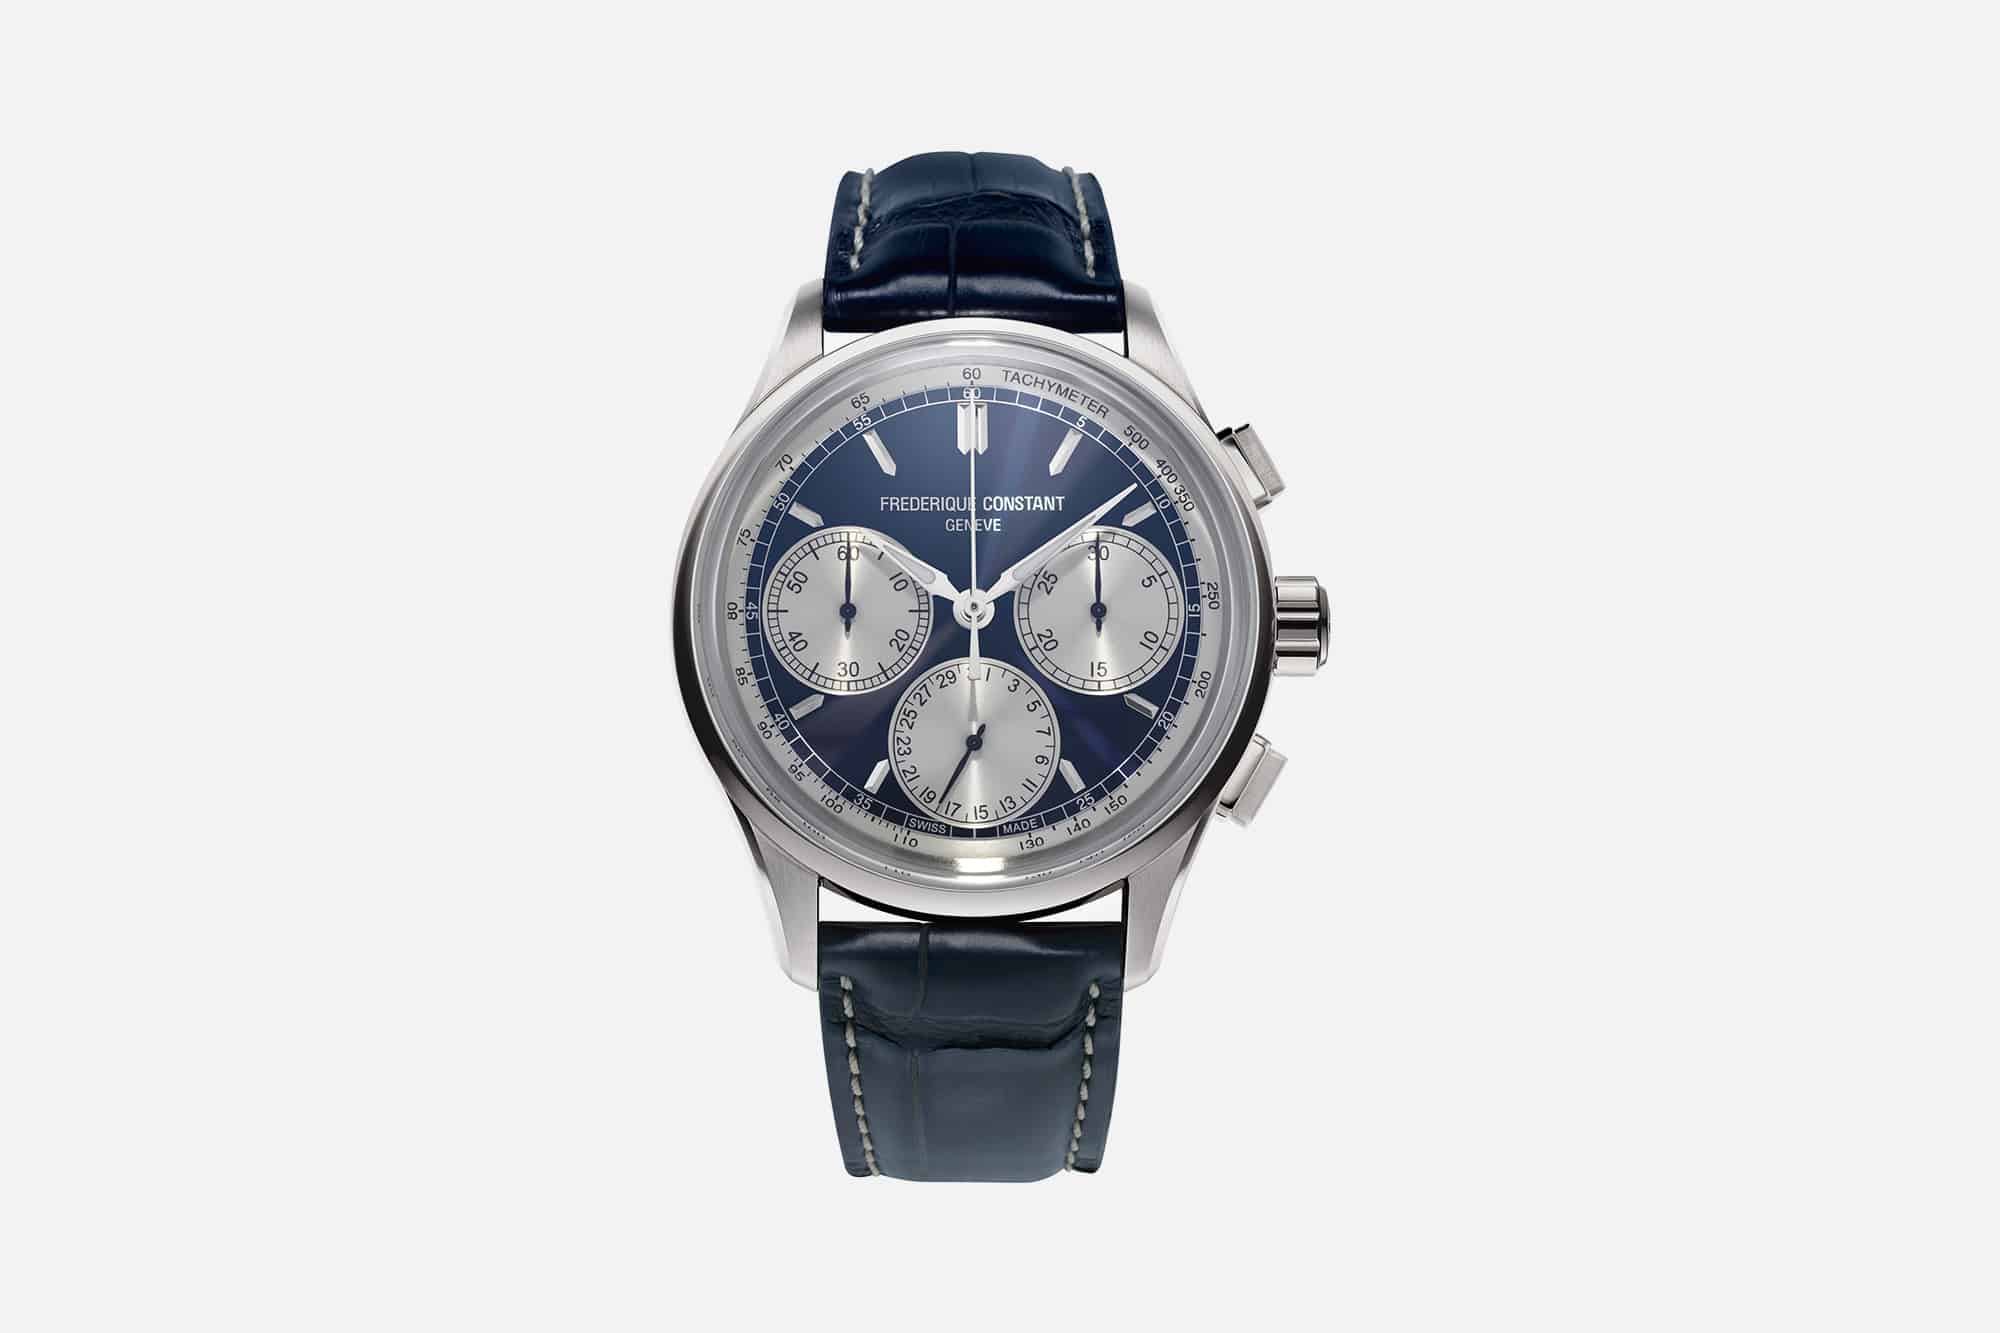 Two New Versions of Frederique Constant’s Flyback Chronograph Give the Watch a Sporty Feel